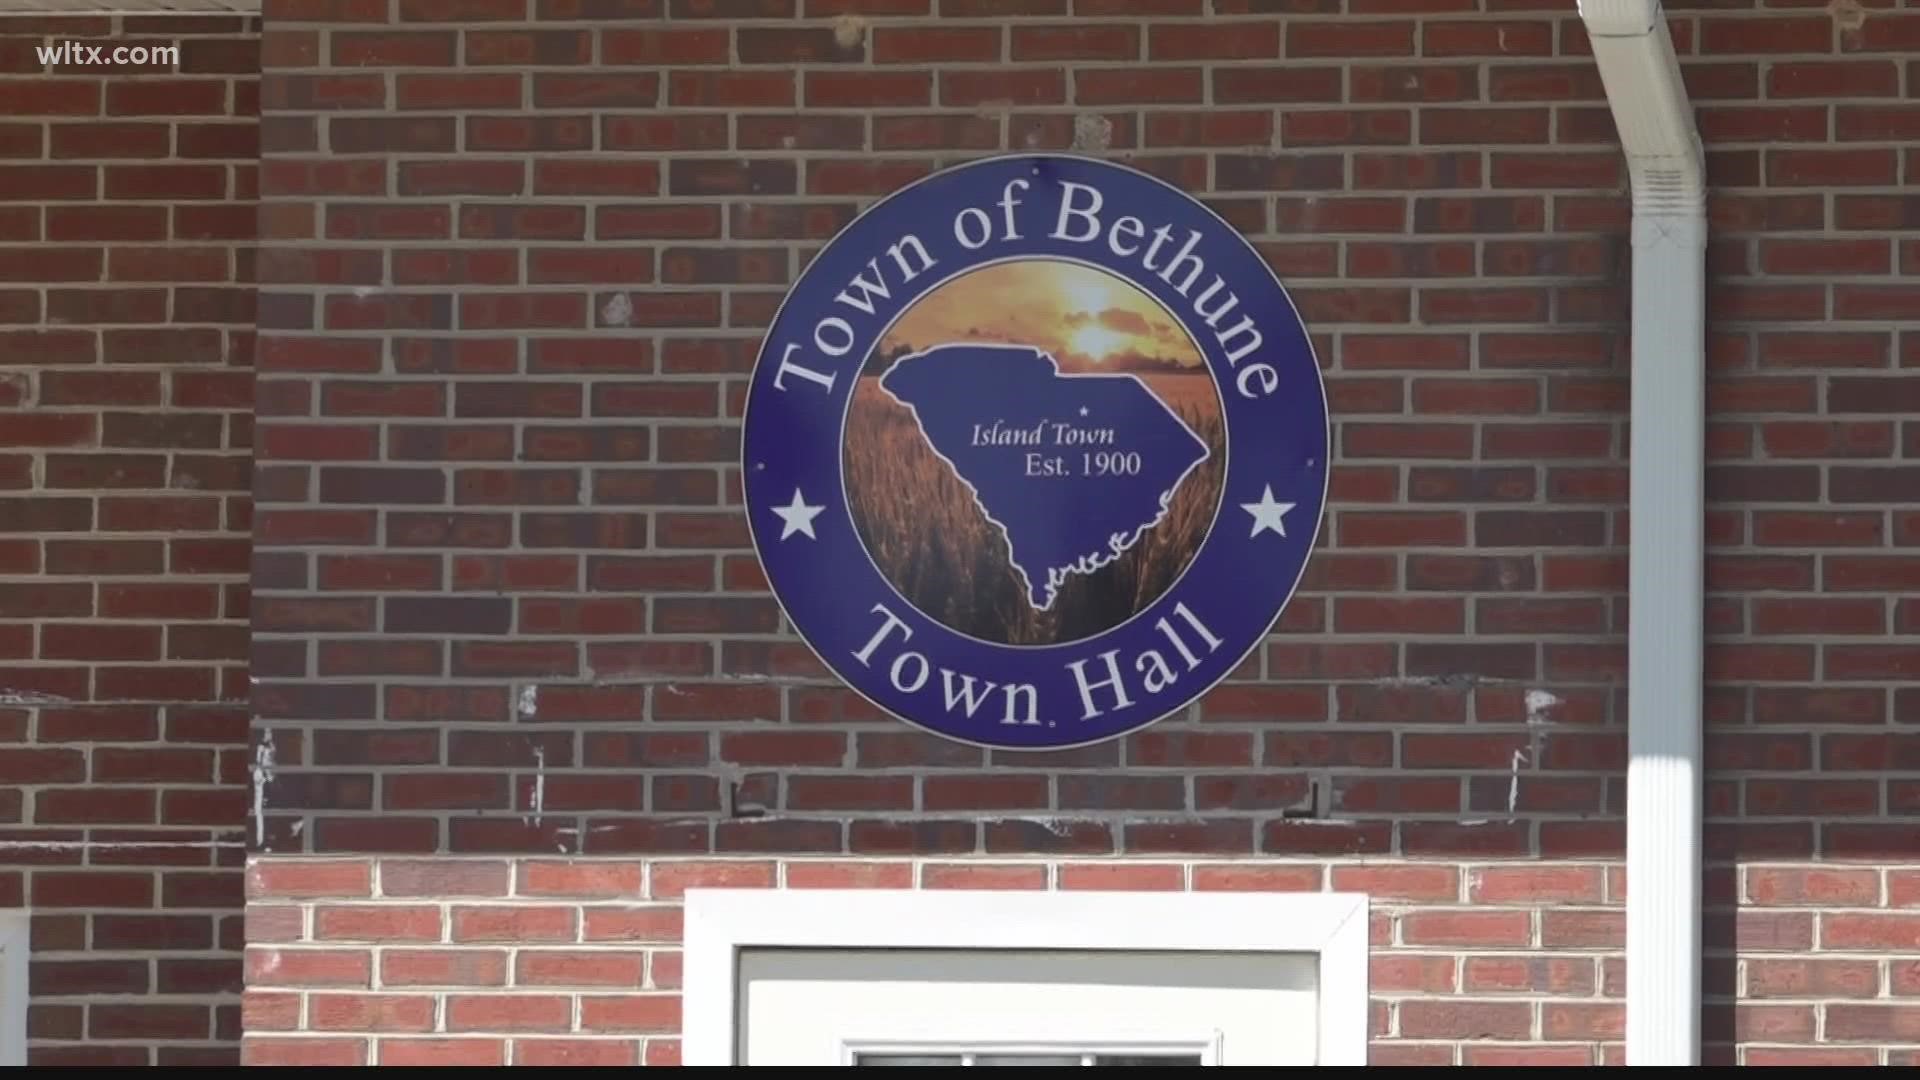 Some Bethune residents say they having a hard time getting inspections and permits. Here's what we learned.